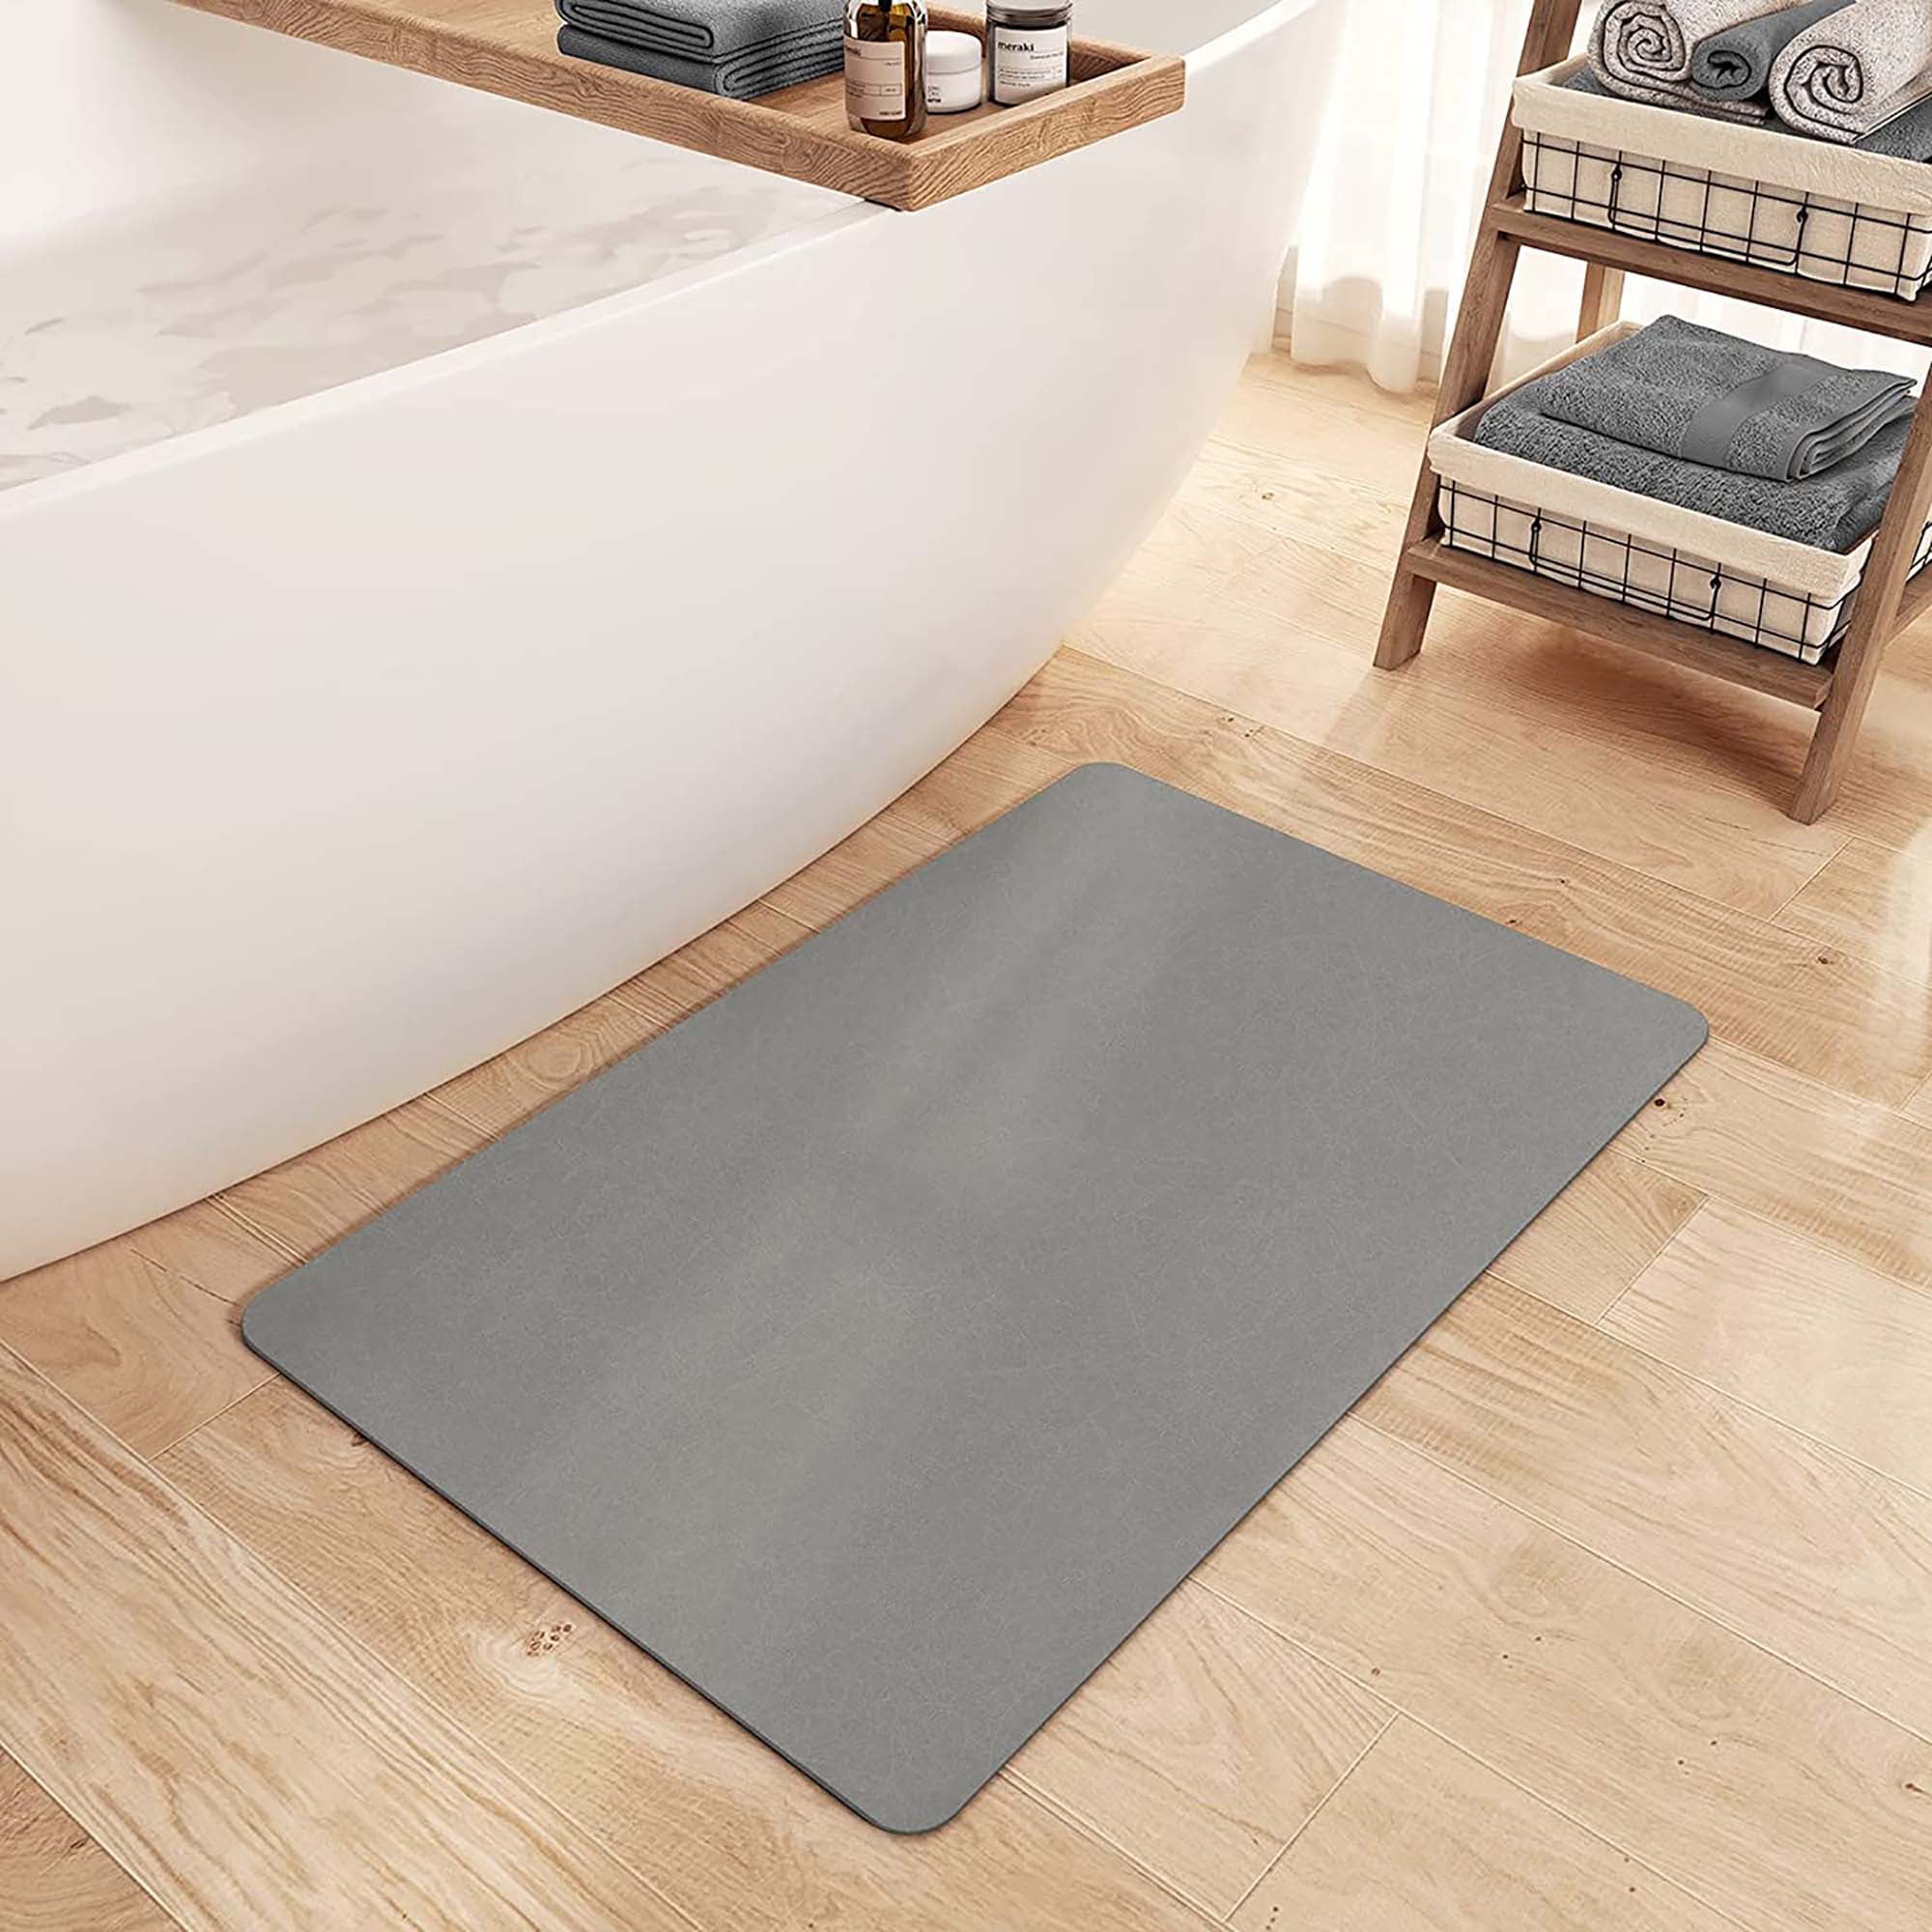 Thickened Bath Mat, Foot Wiping Mat, 23.6 x 15.7 x 1.2 inches, Quick Drying,  Absorbent, Anti-Slip, Fluffy, Antibacterial, Odor Resistant, Entrance Mat,  Bathroom, Kitchen, Washable 